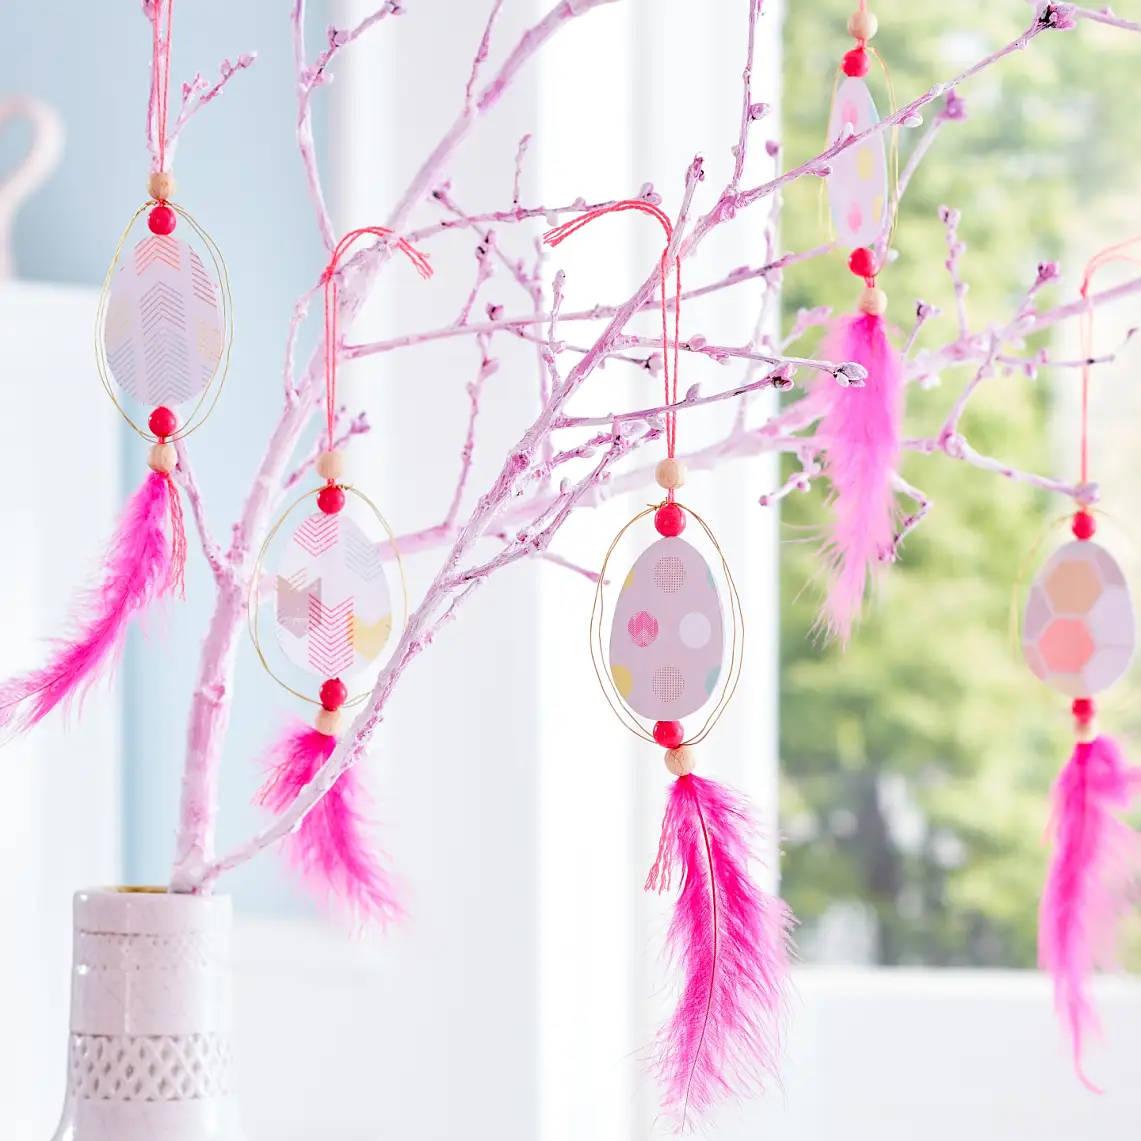 These Easter egg hangers remind us of dream catchers and look great on a simple twig - like in our Easter tree decoration -, as well as on a birch branch with soft green.